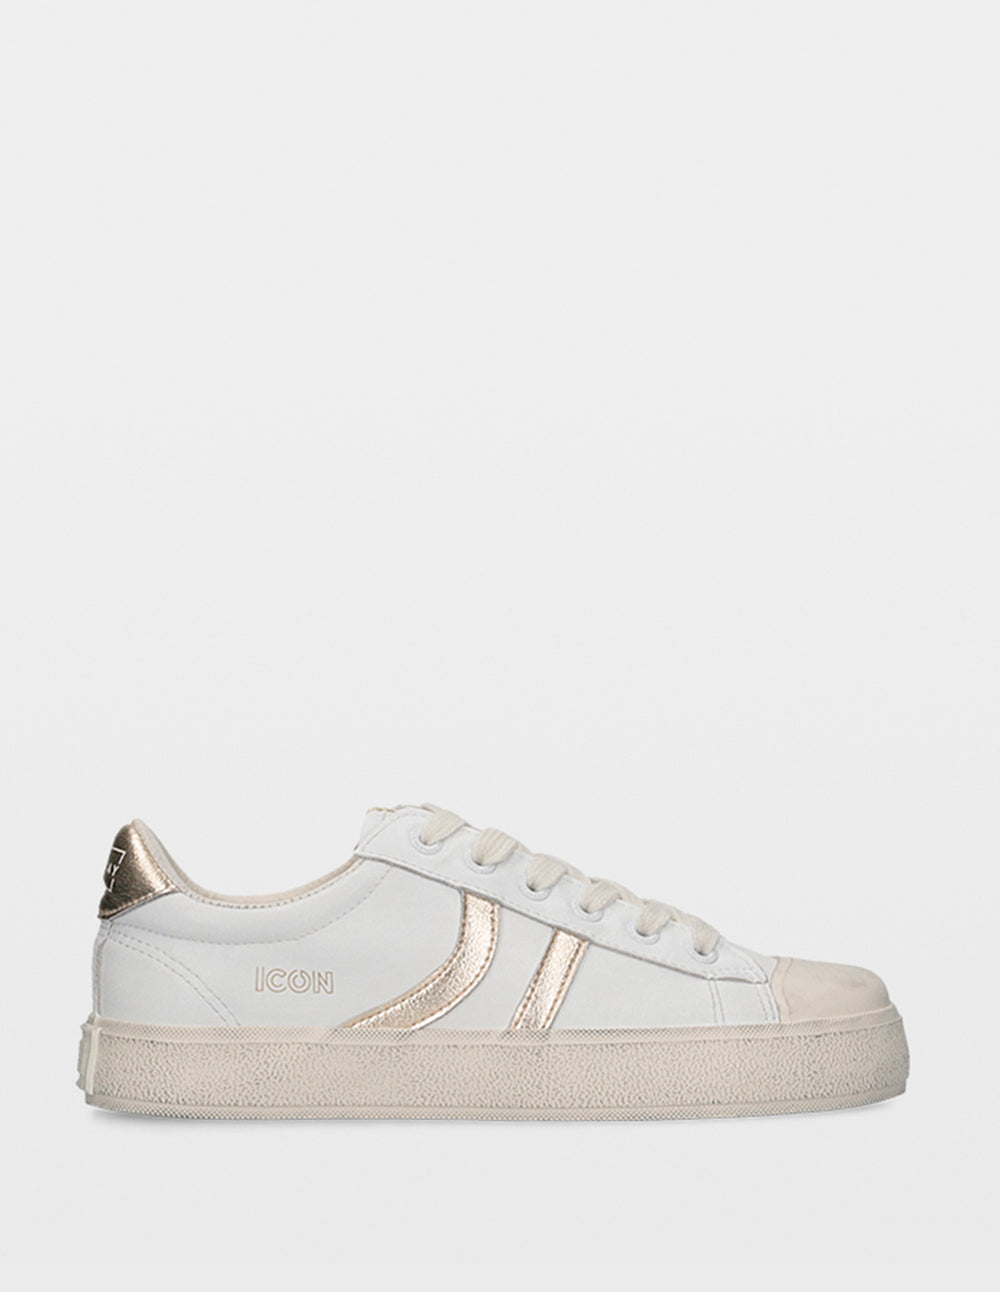 ICON-NOW WHITE/GOLD LEATHER MUJER